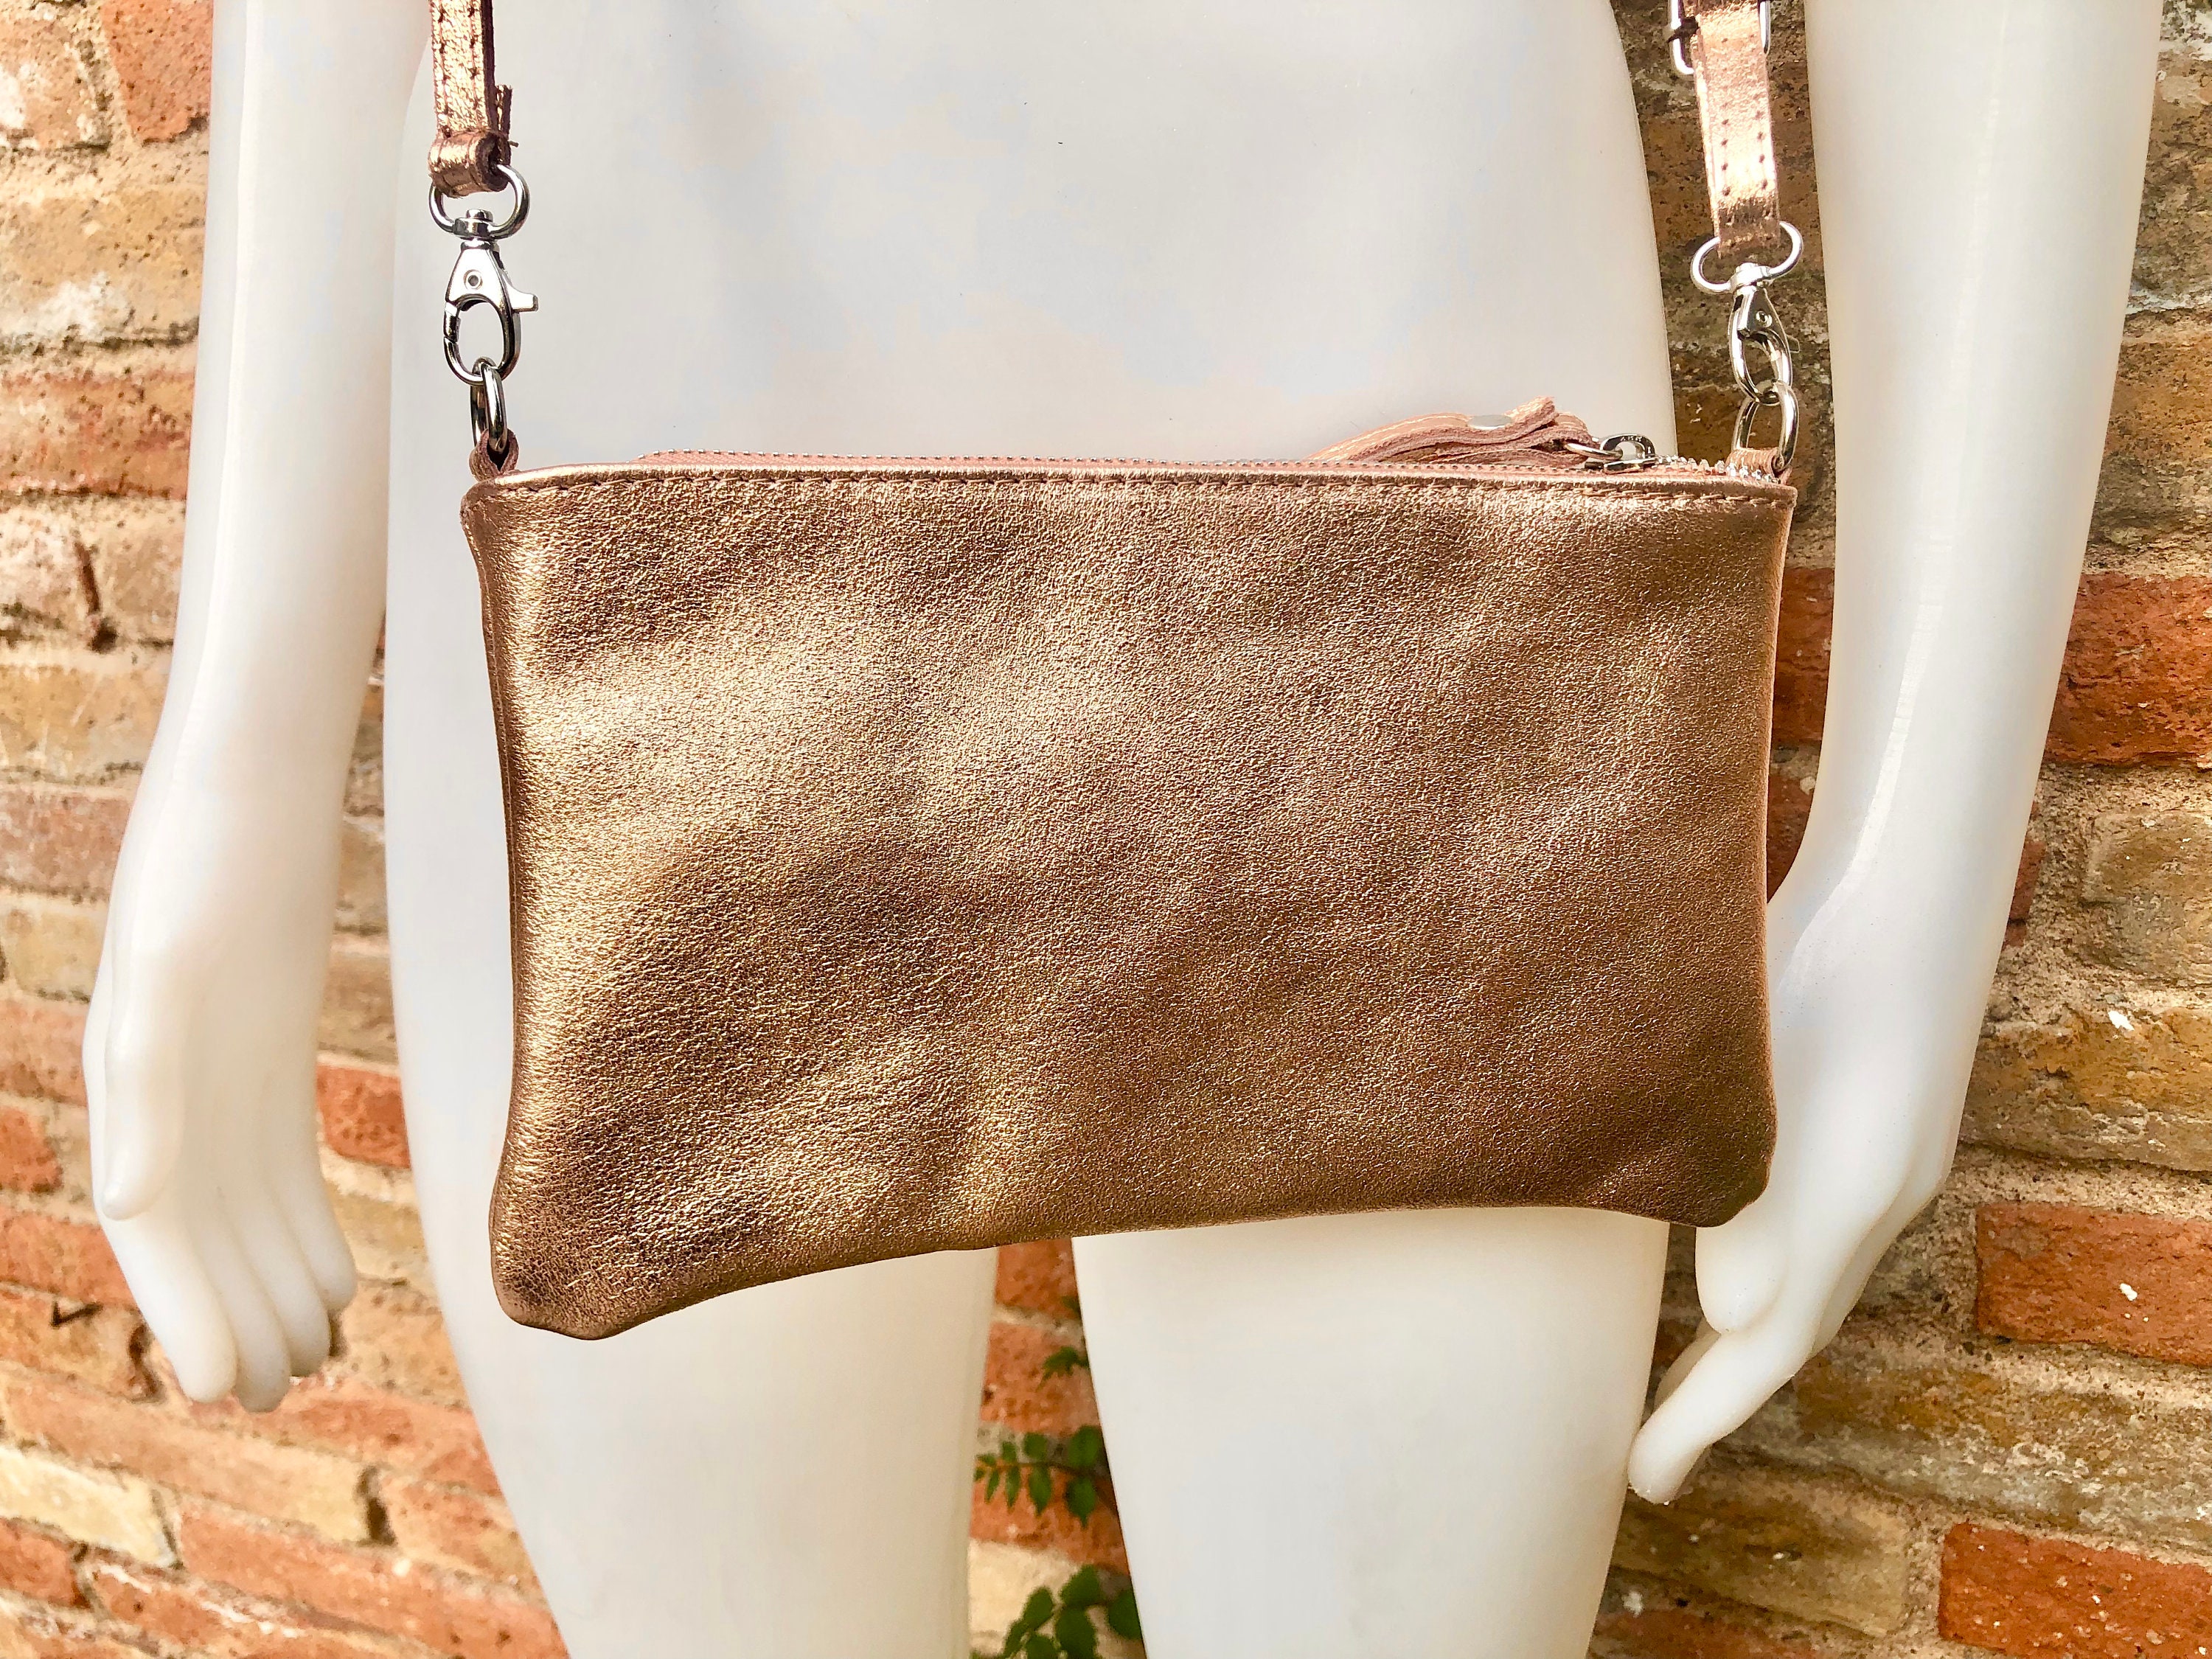 Small leather bag in METALLIC pink. Cross body, shoulder bag or